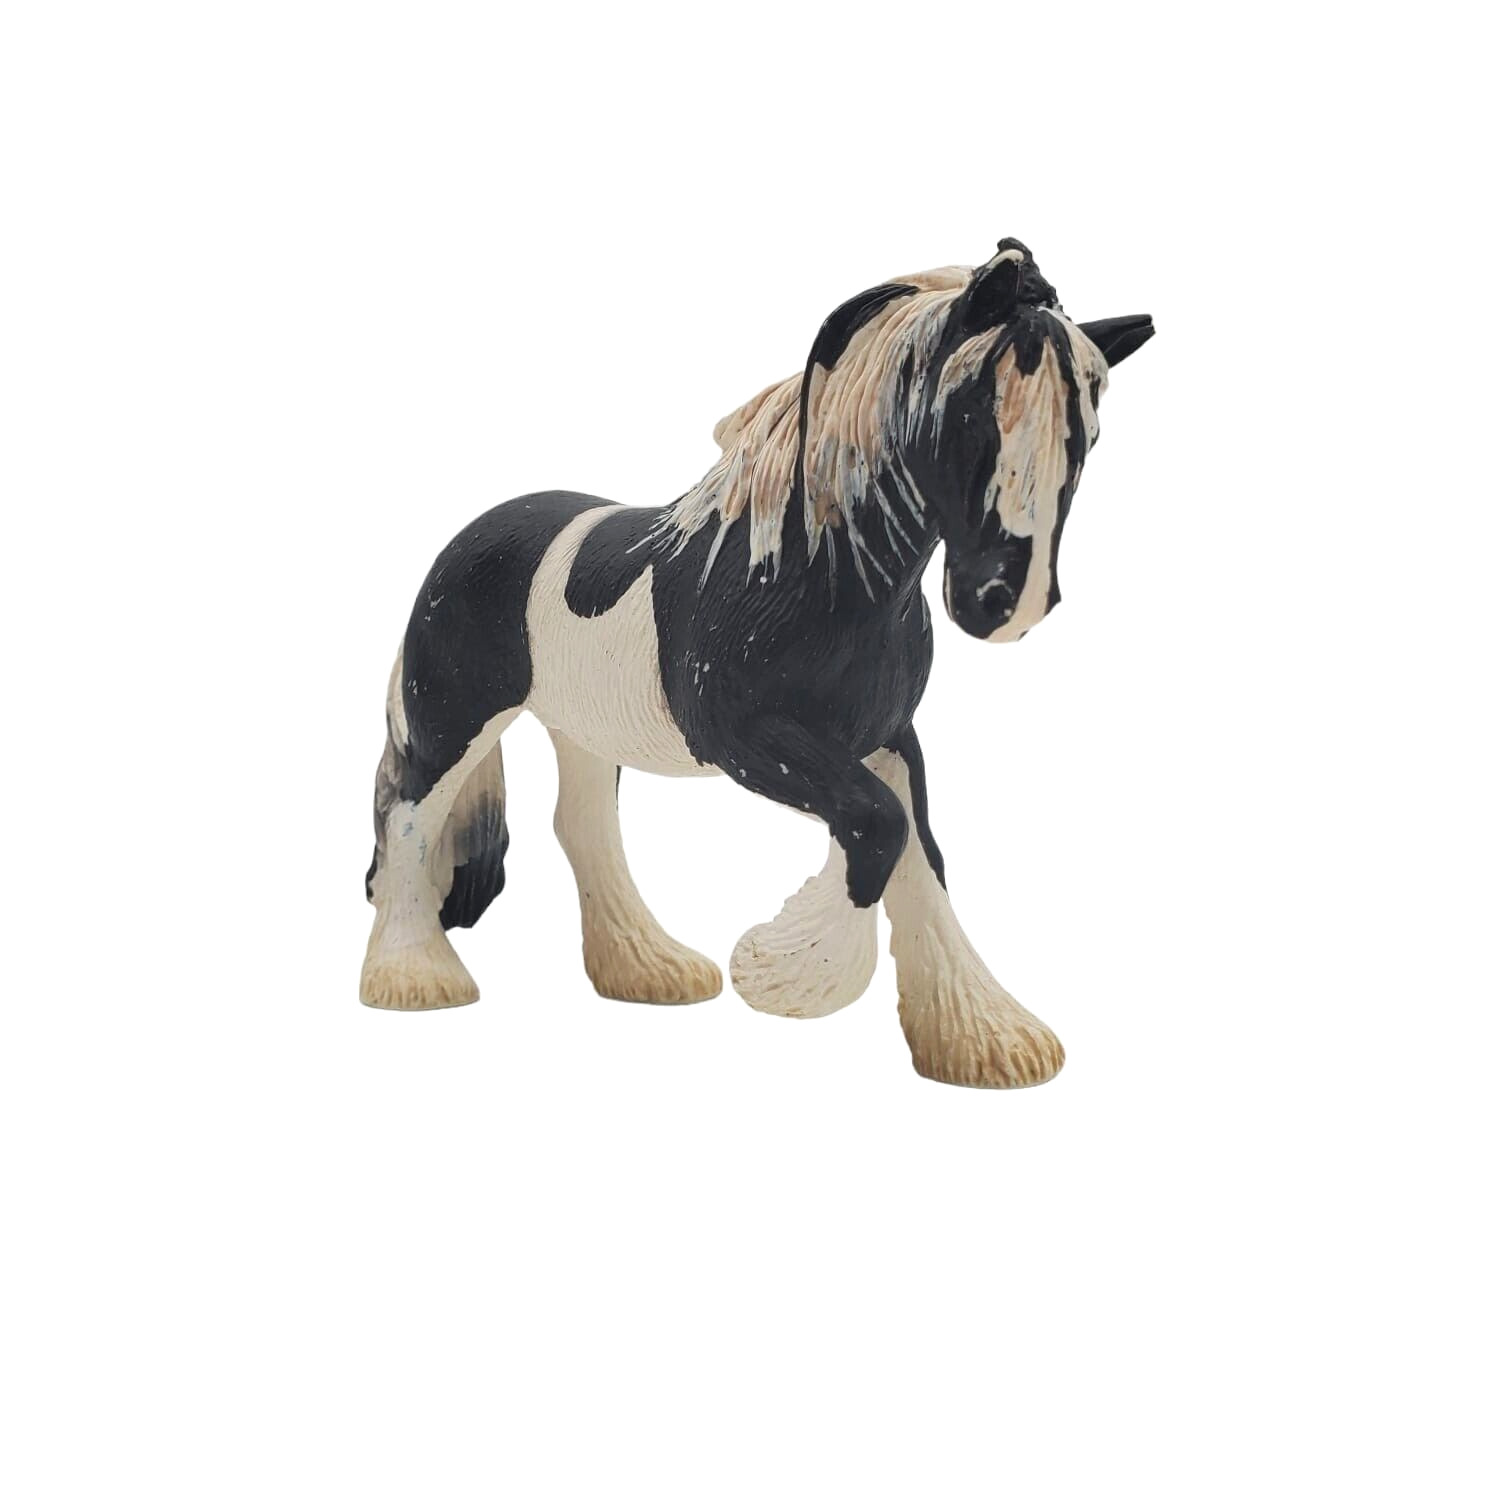 Schleich Horse Tinker Mare Figure D-73527 Am Limes 69 2003 Collectable Horse